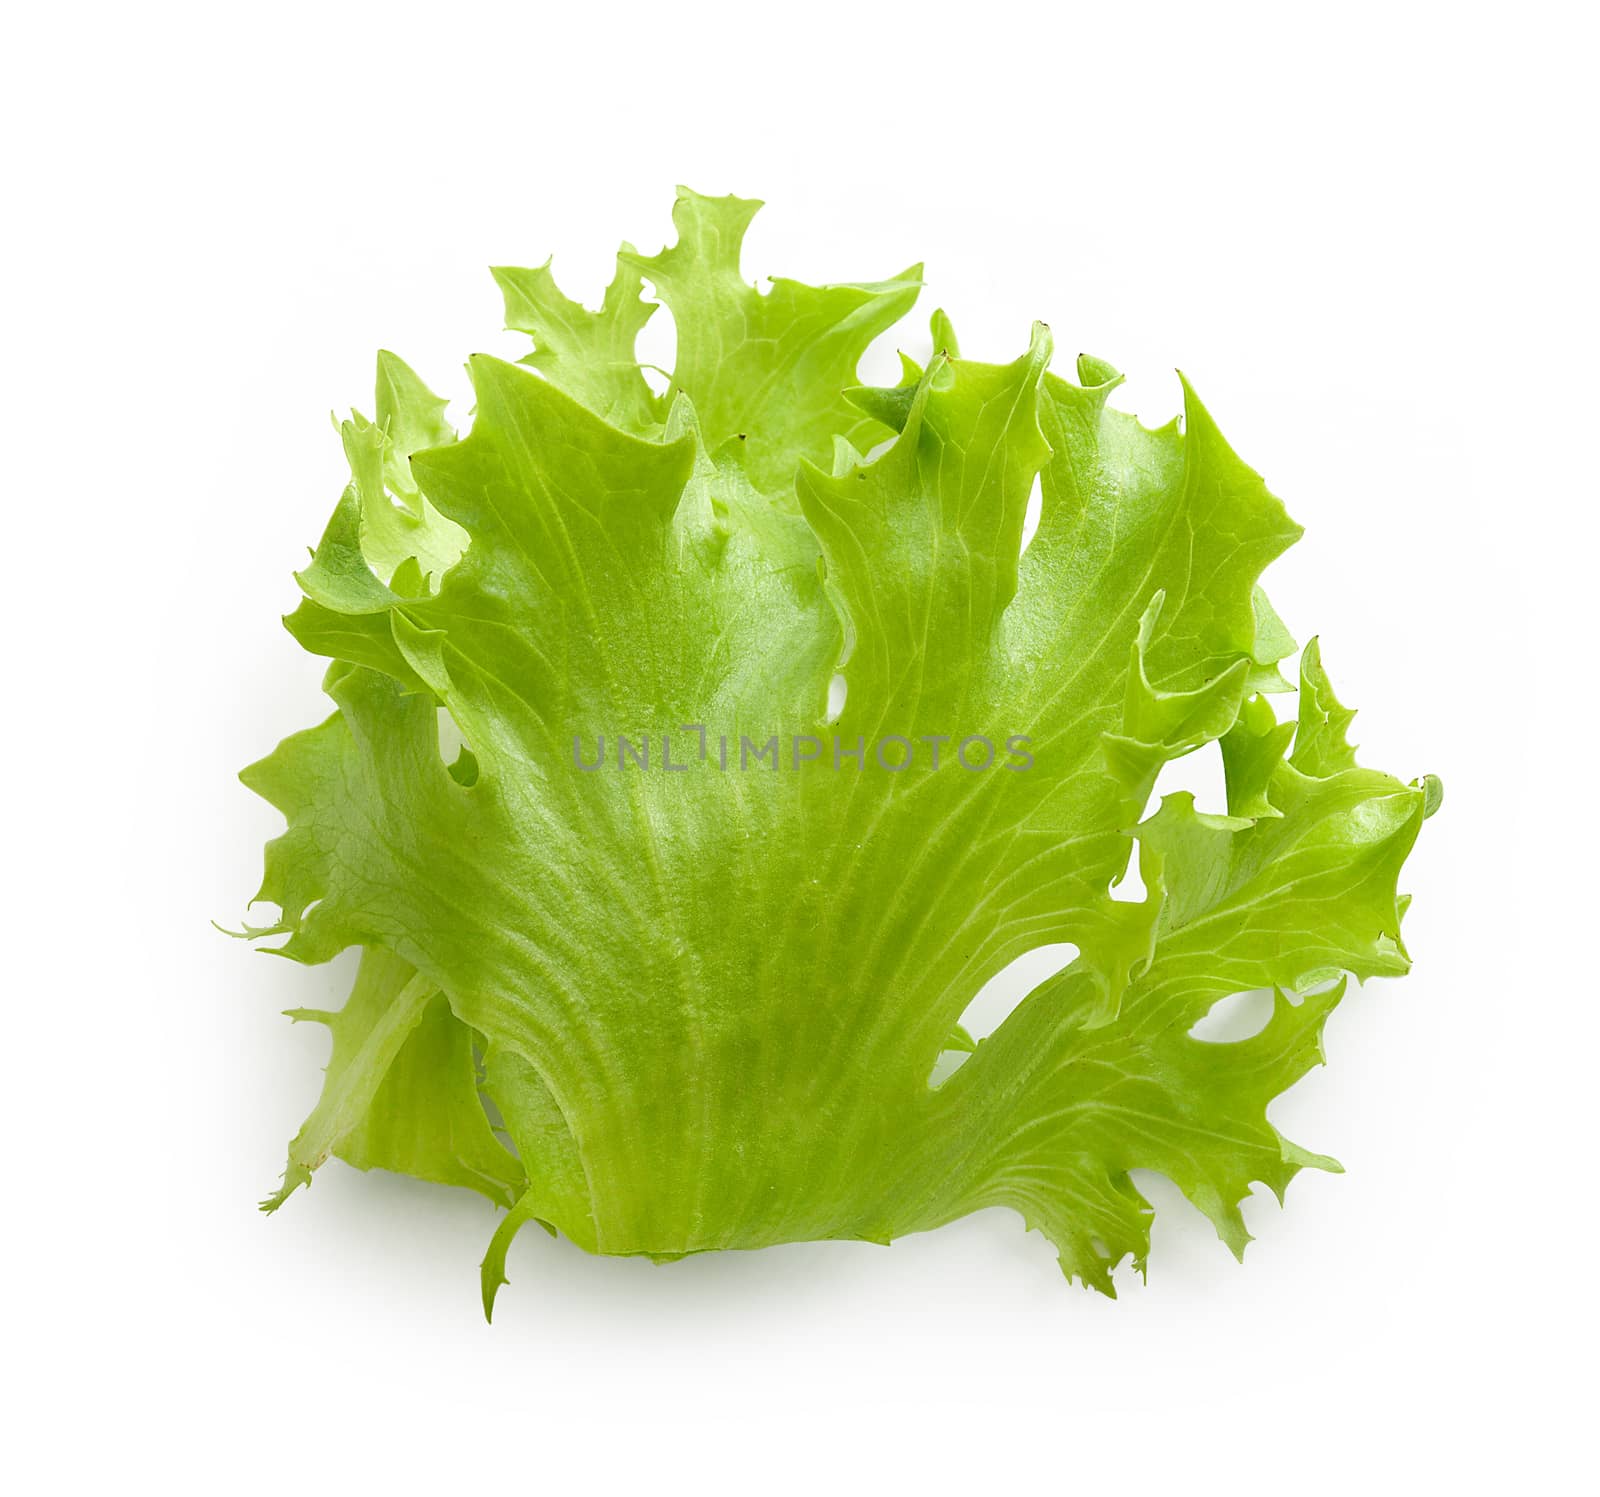 Top view of fresh green lettuce on the white background